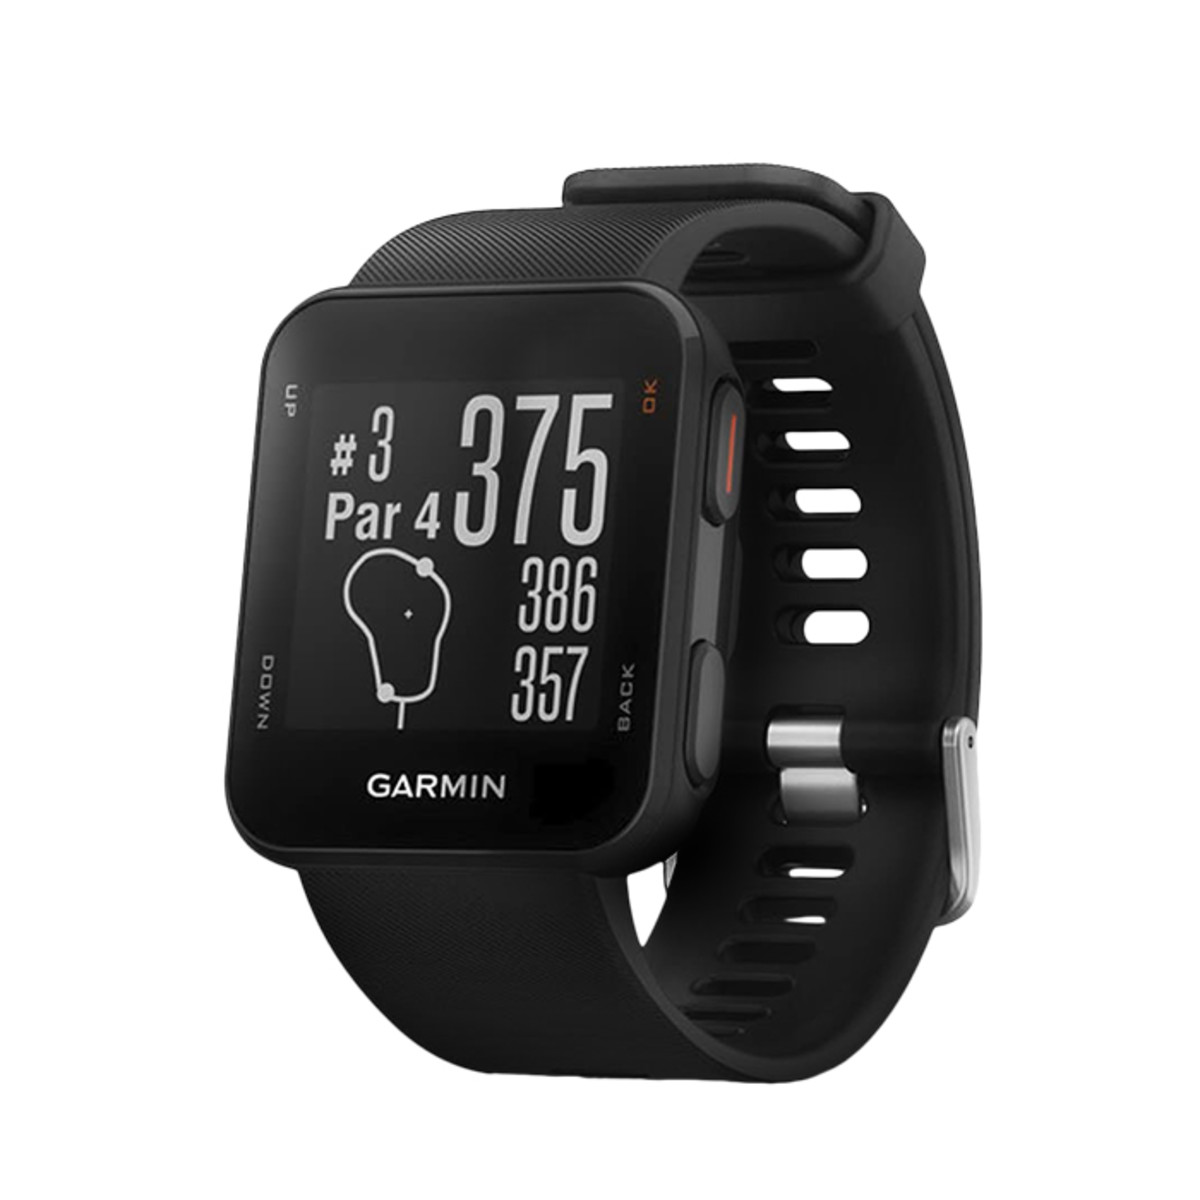 Golf Gps Watch With Heart Rate Monitor